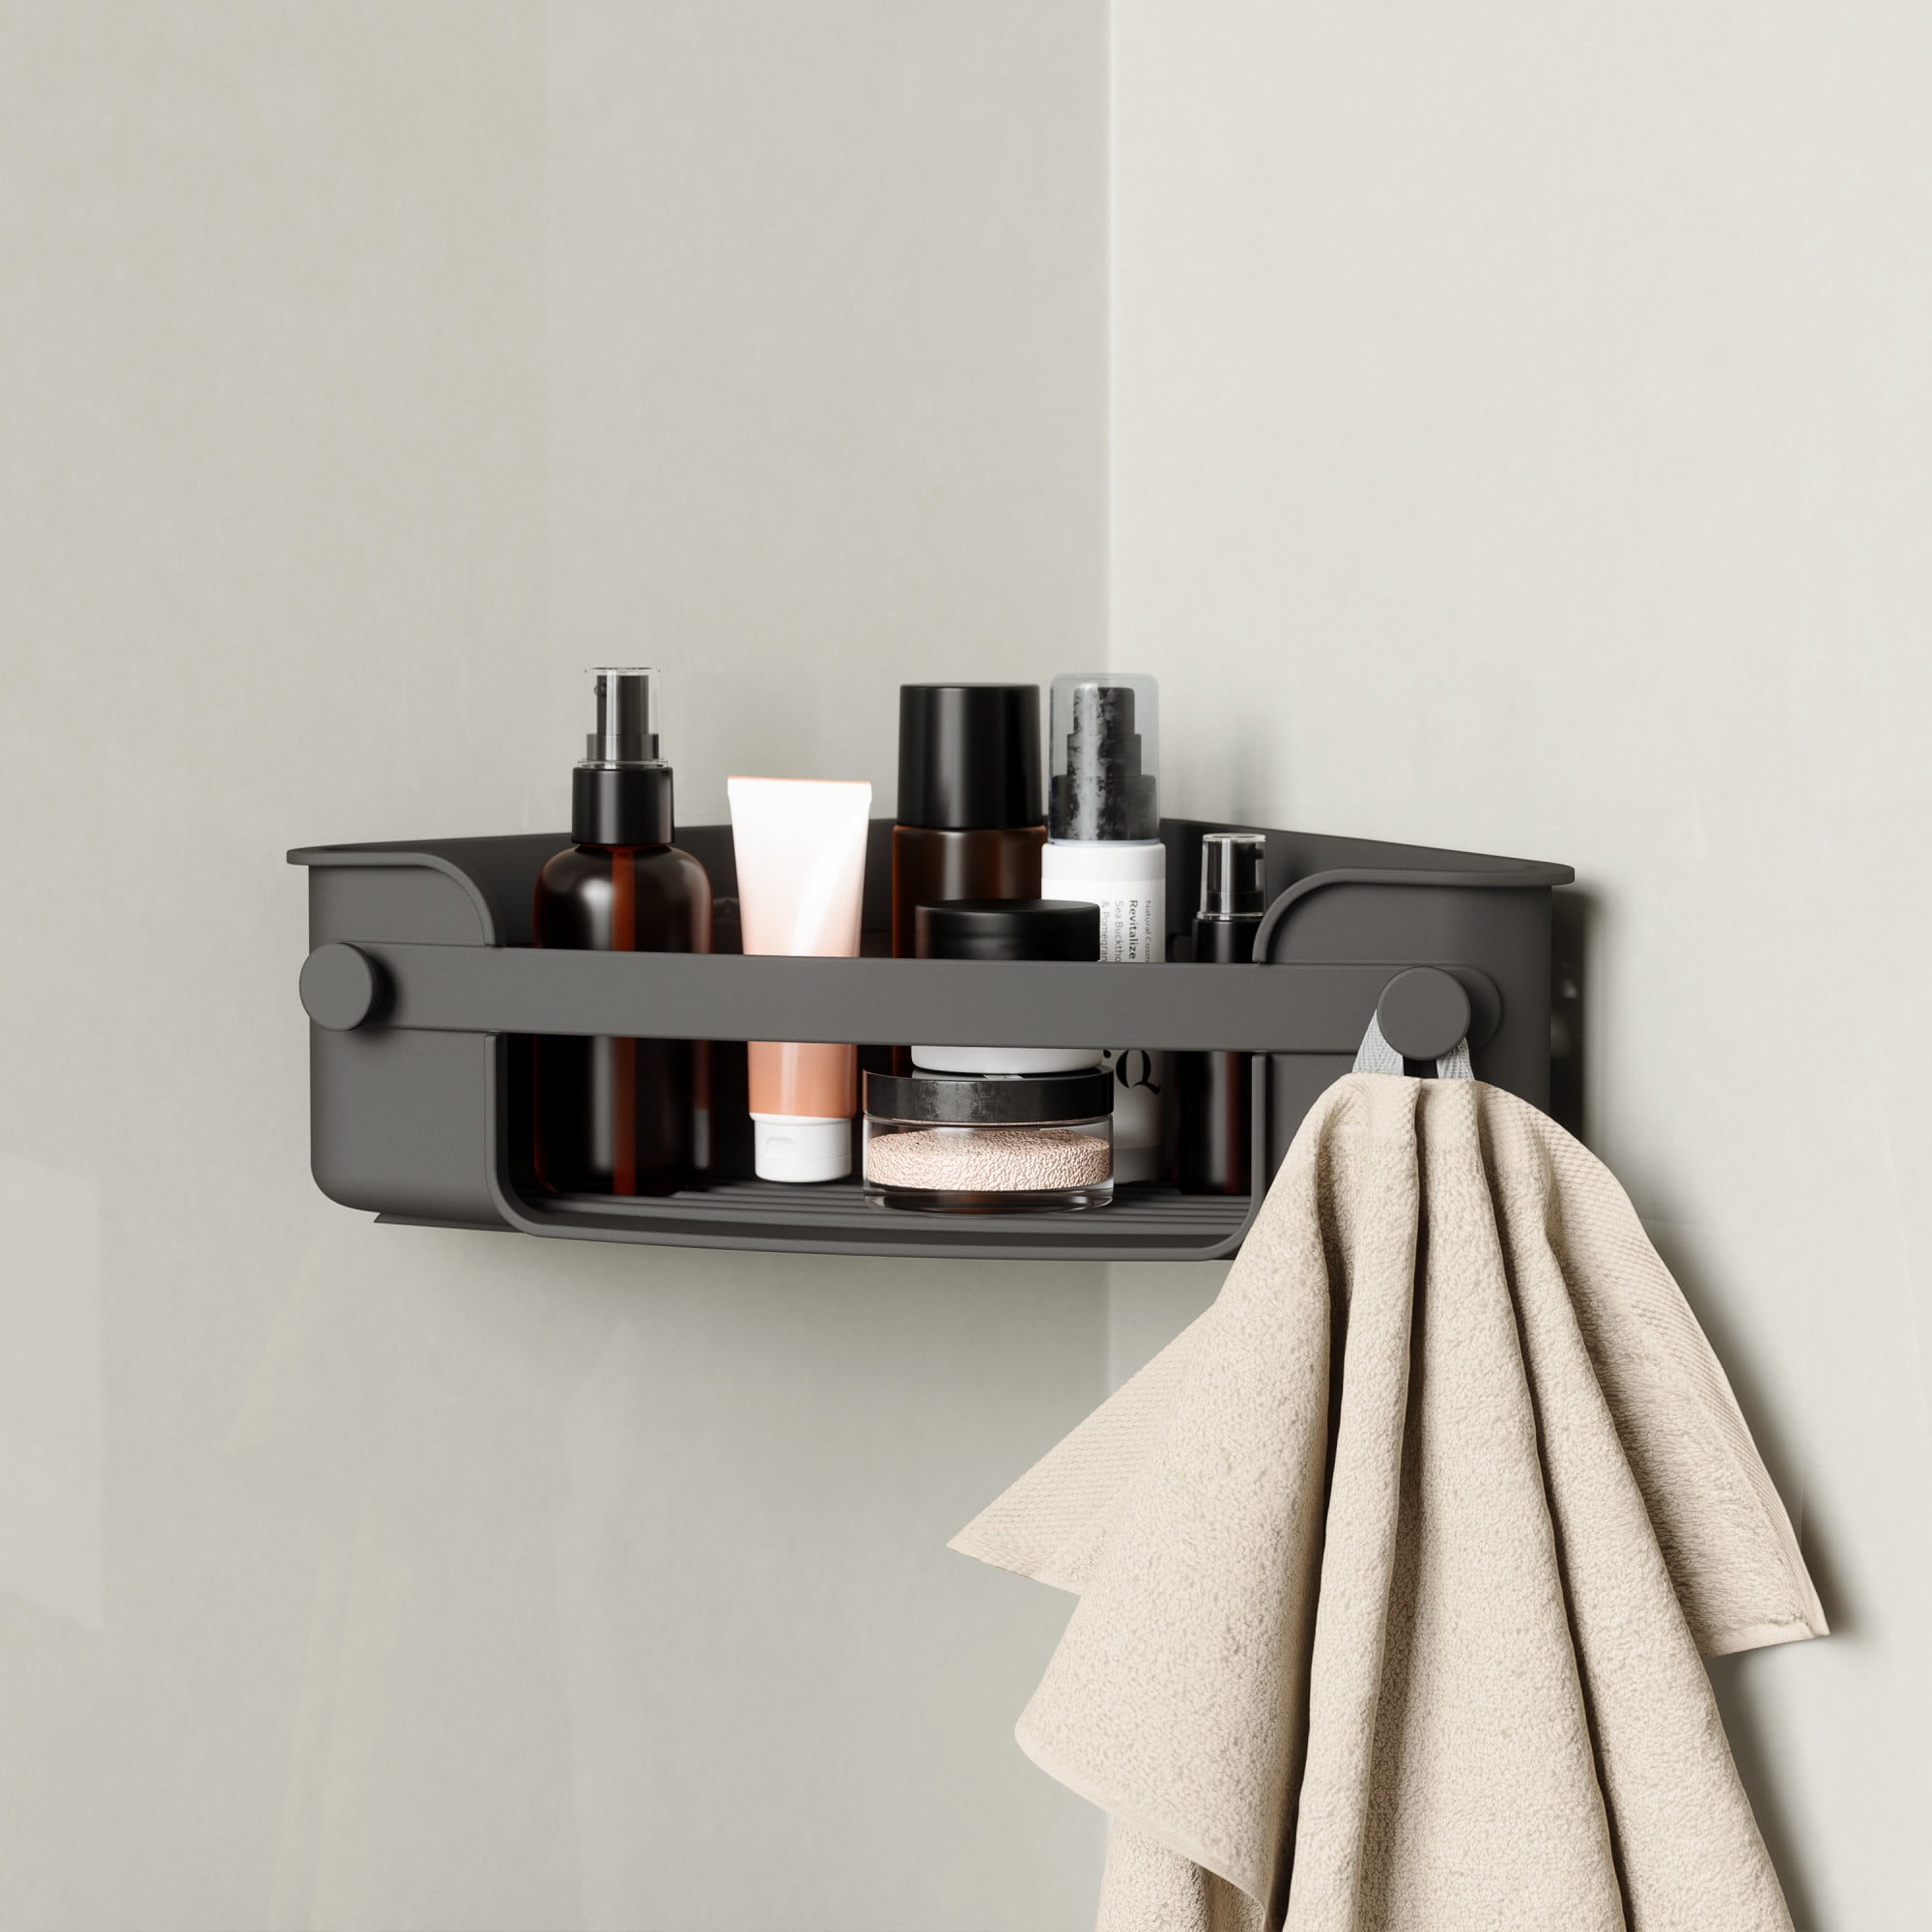 Black Single Layer Bathroom Shelf, Wall Mount Organizer For Toiltes,  Washrooms, Wash Basins And Bathtooms, With Suction Cups, No Need To Drill  Holes